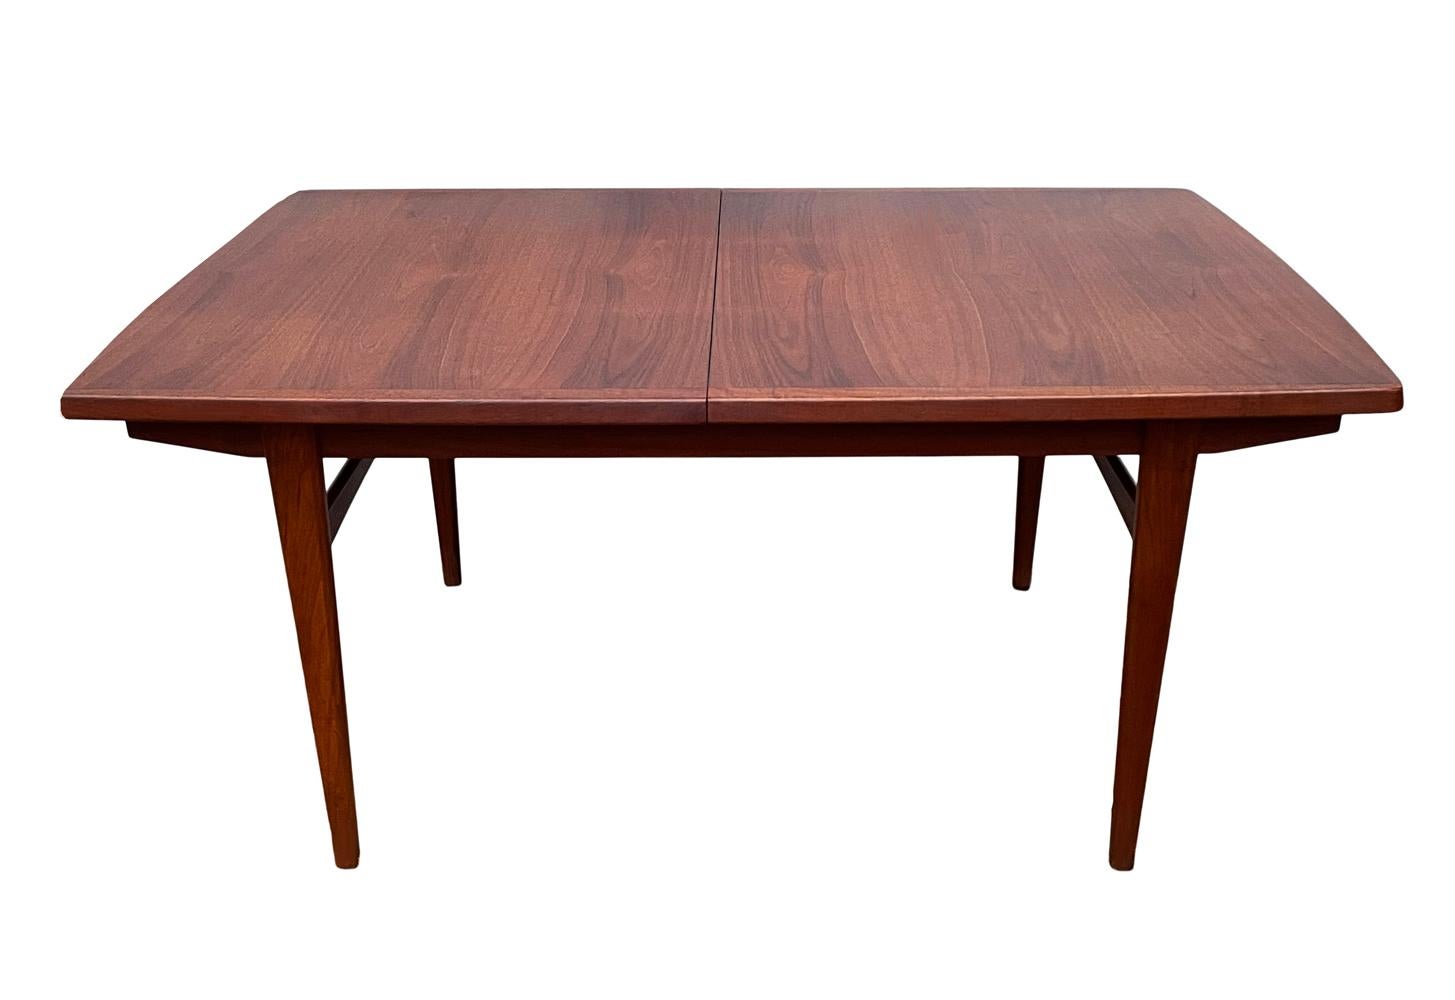 A large rectangular dining table from Denmark circa 1960's. It features beautiful teak wood construction. Included is 2 extension leaves that measure 18 inches in width. Total maximum length of table is 100.5 inches.